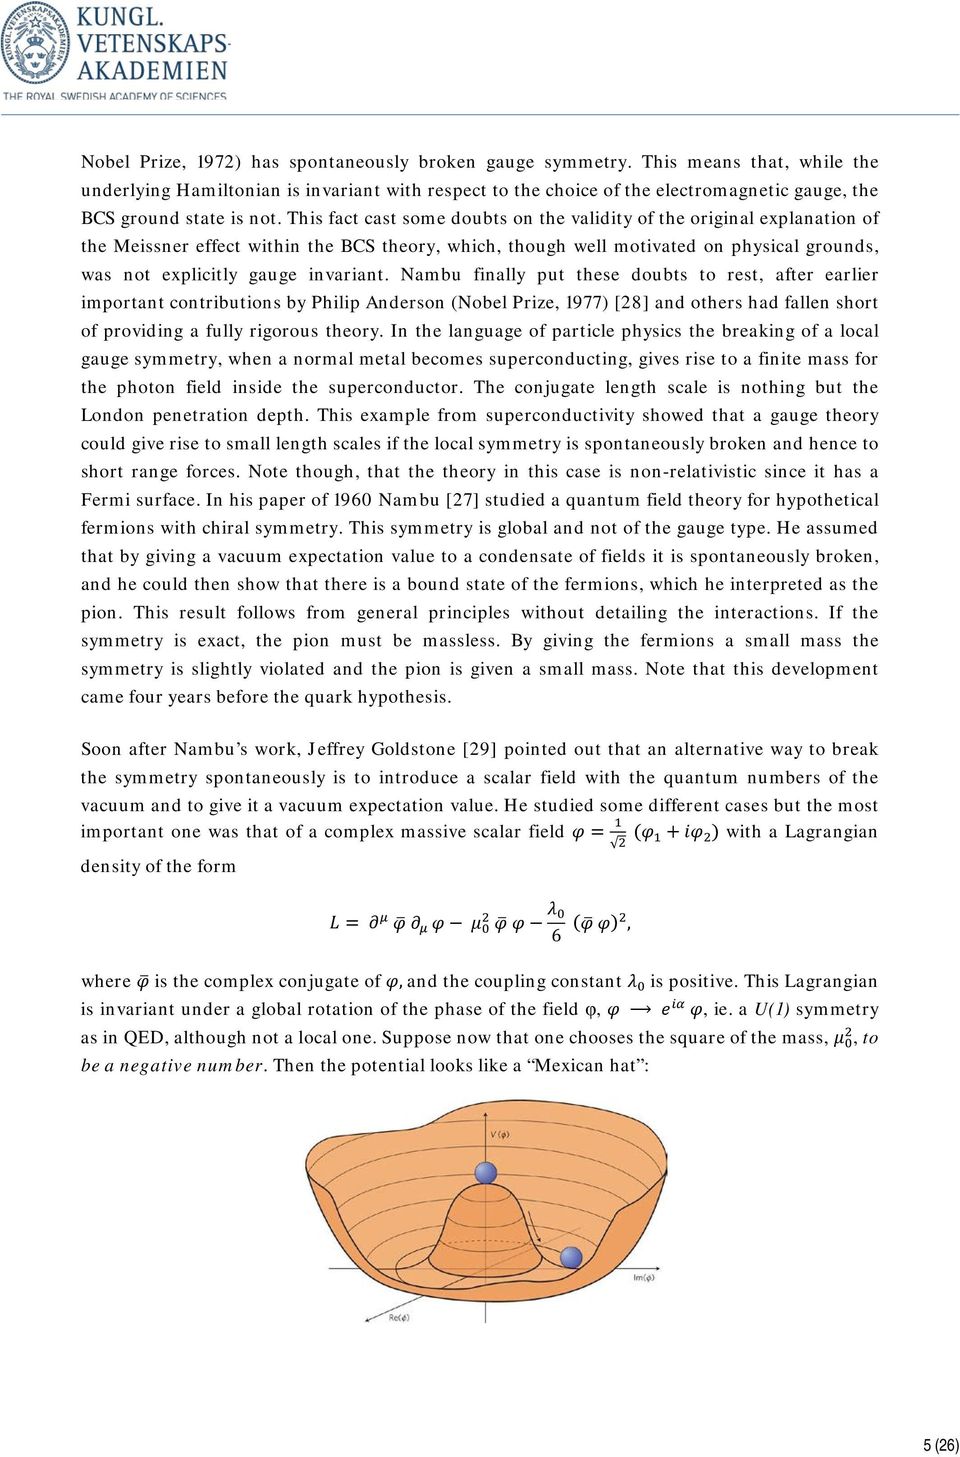 This fact cast some doubts on the validity of the original explanation of the Meissner effect within the BCS theory, which, though well motivated on physical grounds, was not explicitly gauge